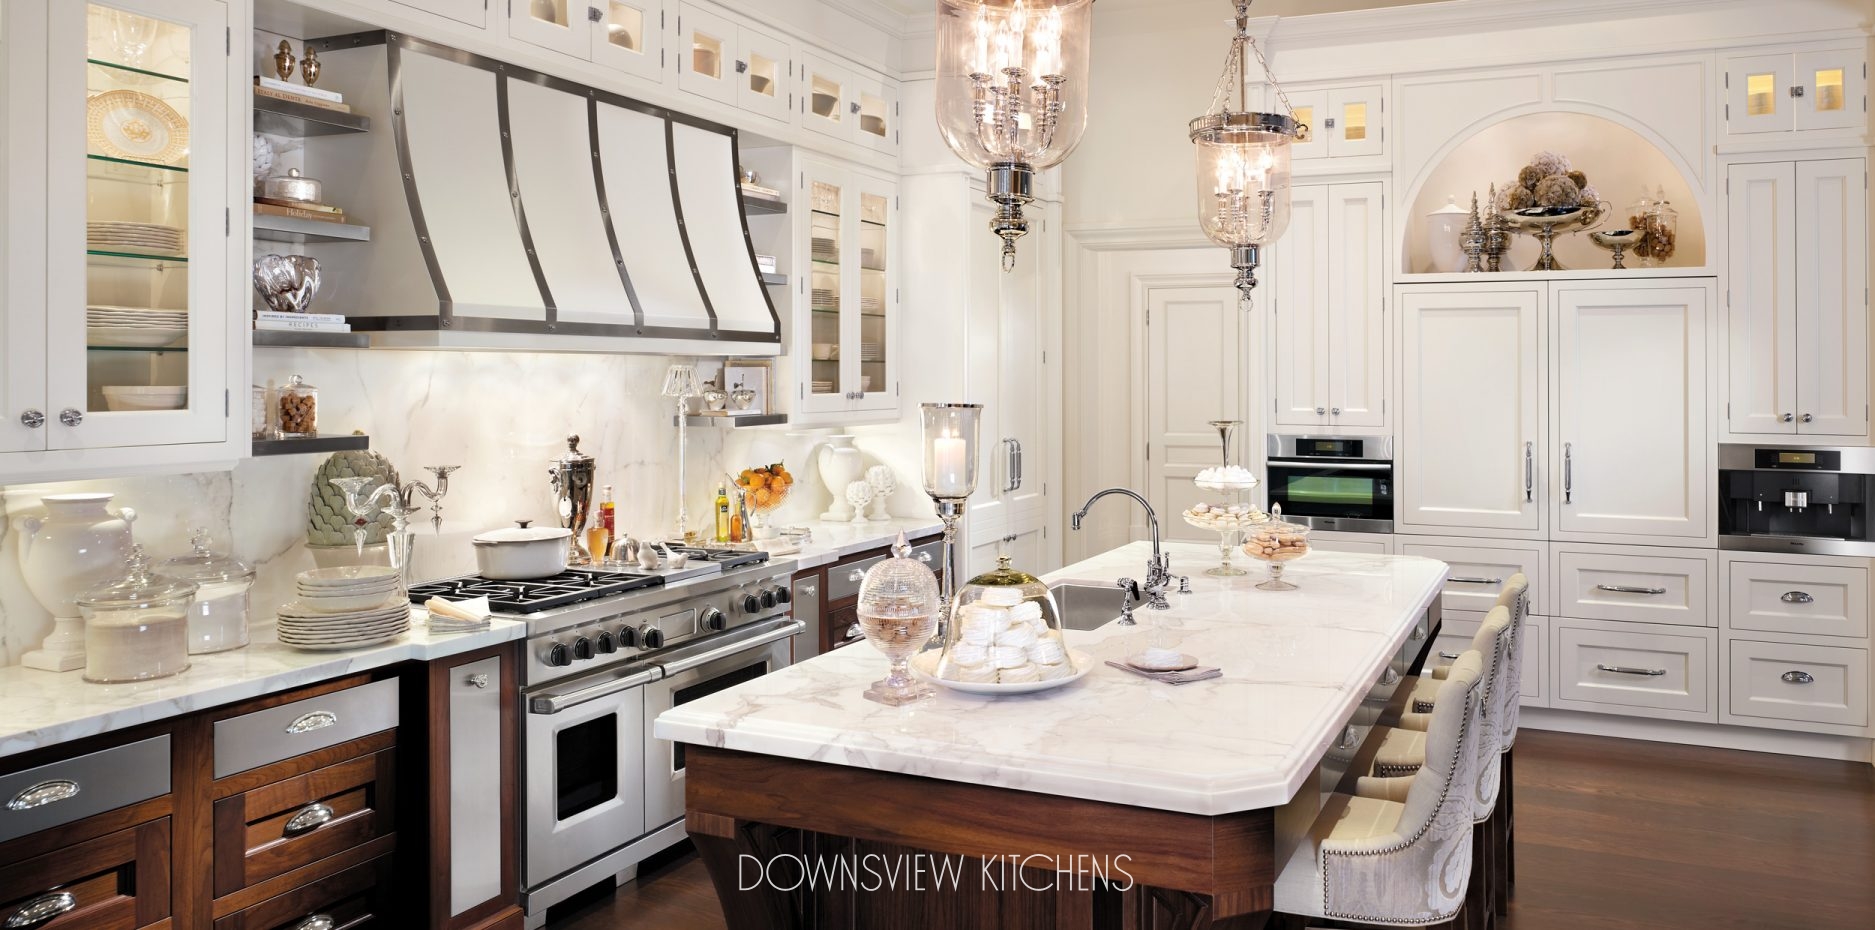 Tailored Fit Downsview Kitchens And